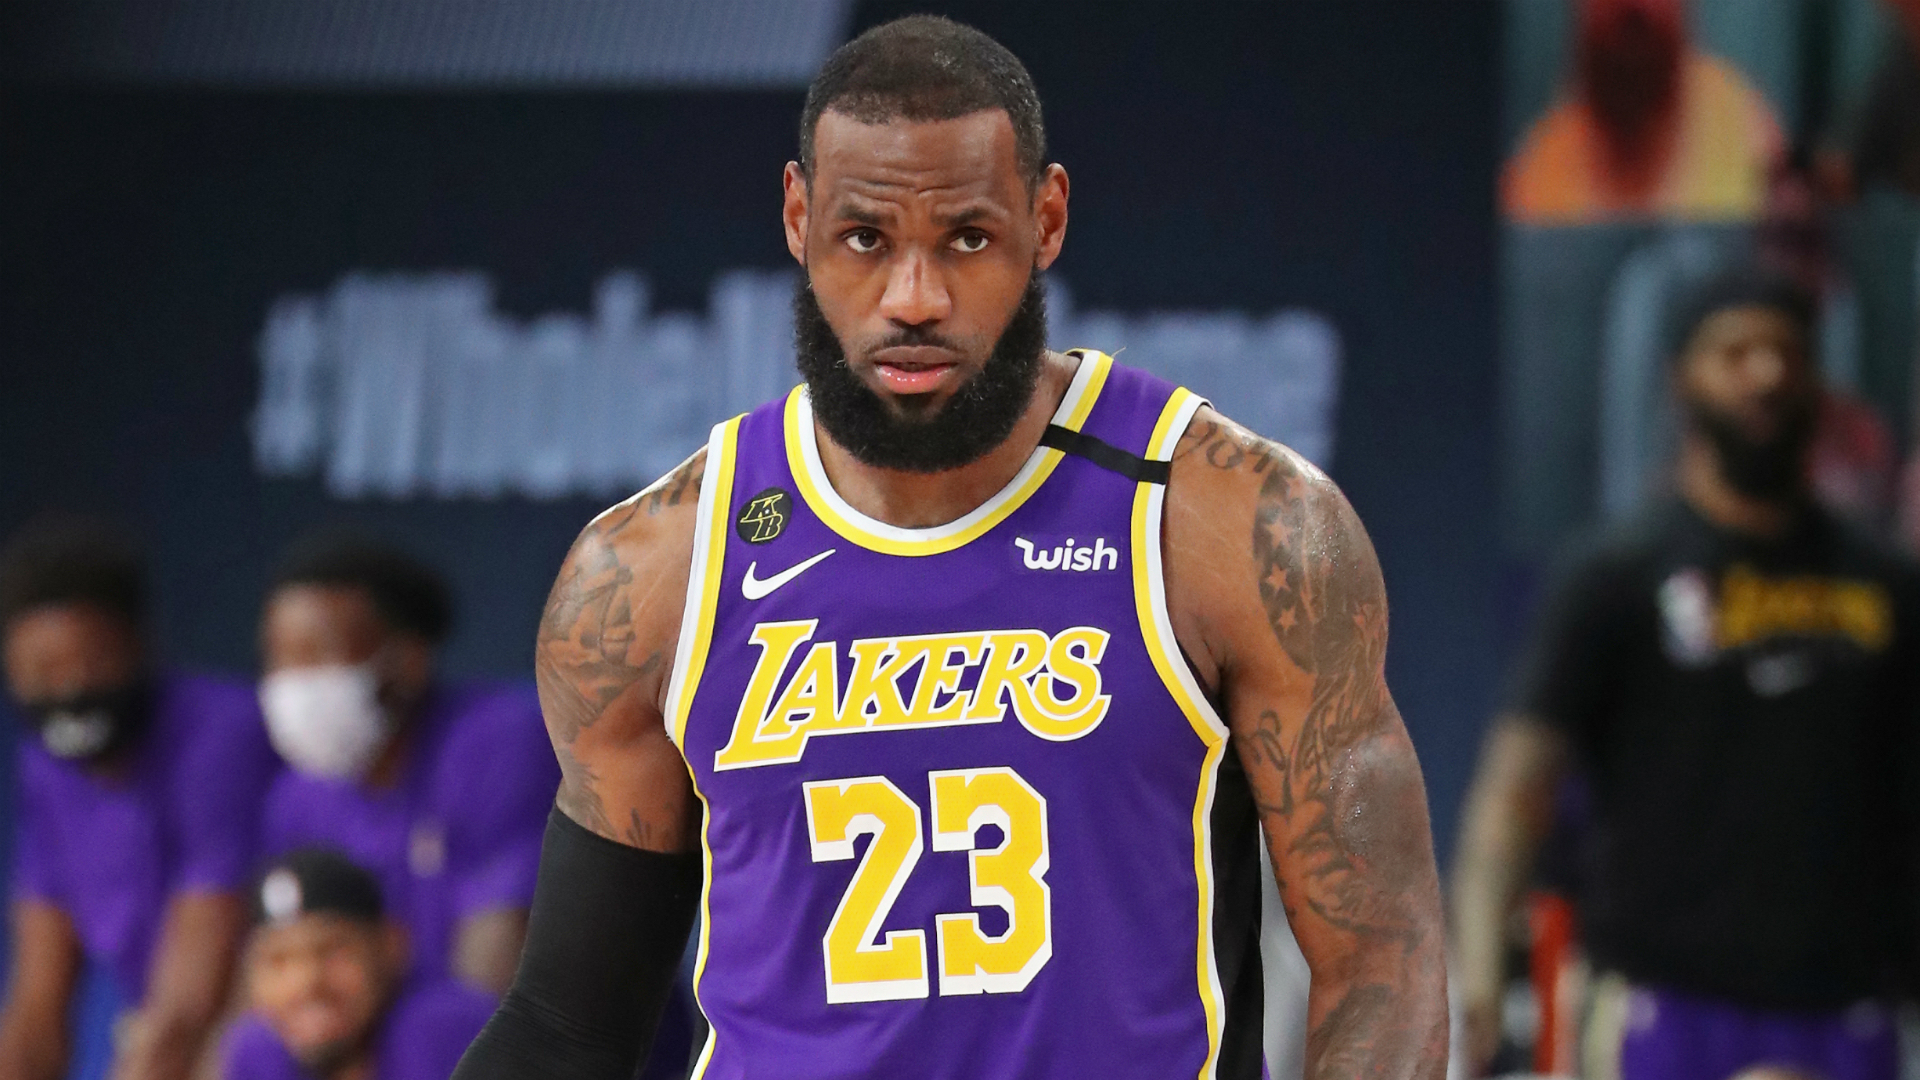 Los Angeles Lakers superstar LeBron James previewed his upcoming reunion with the Miami Heat in the NBA Finals.